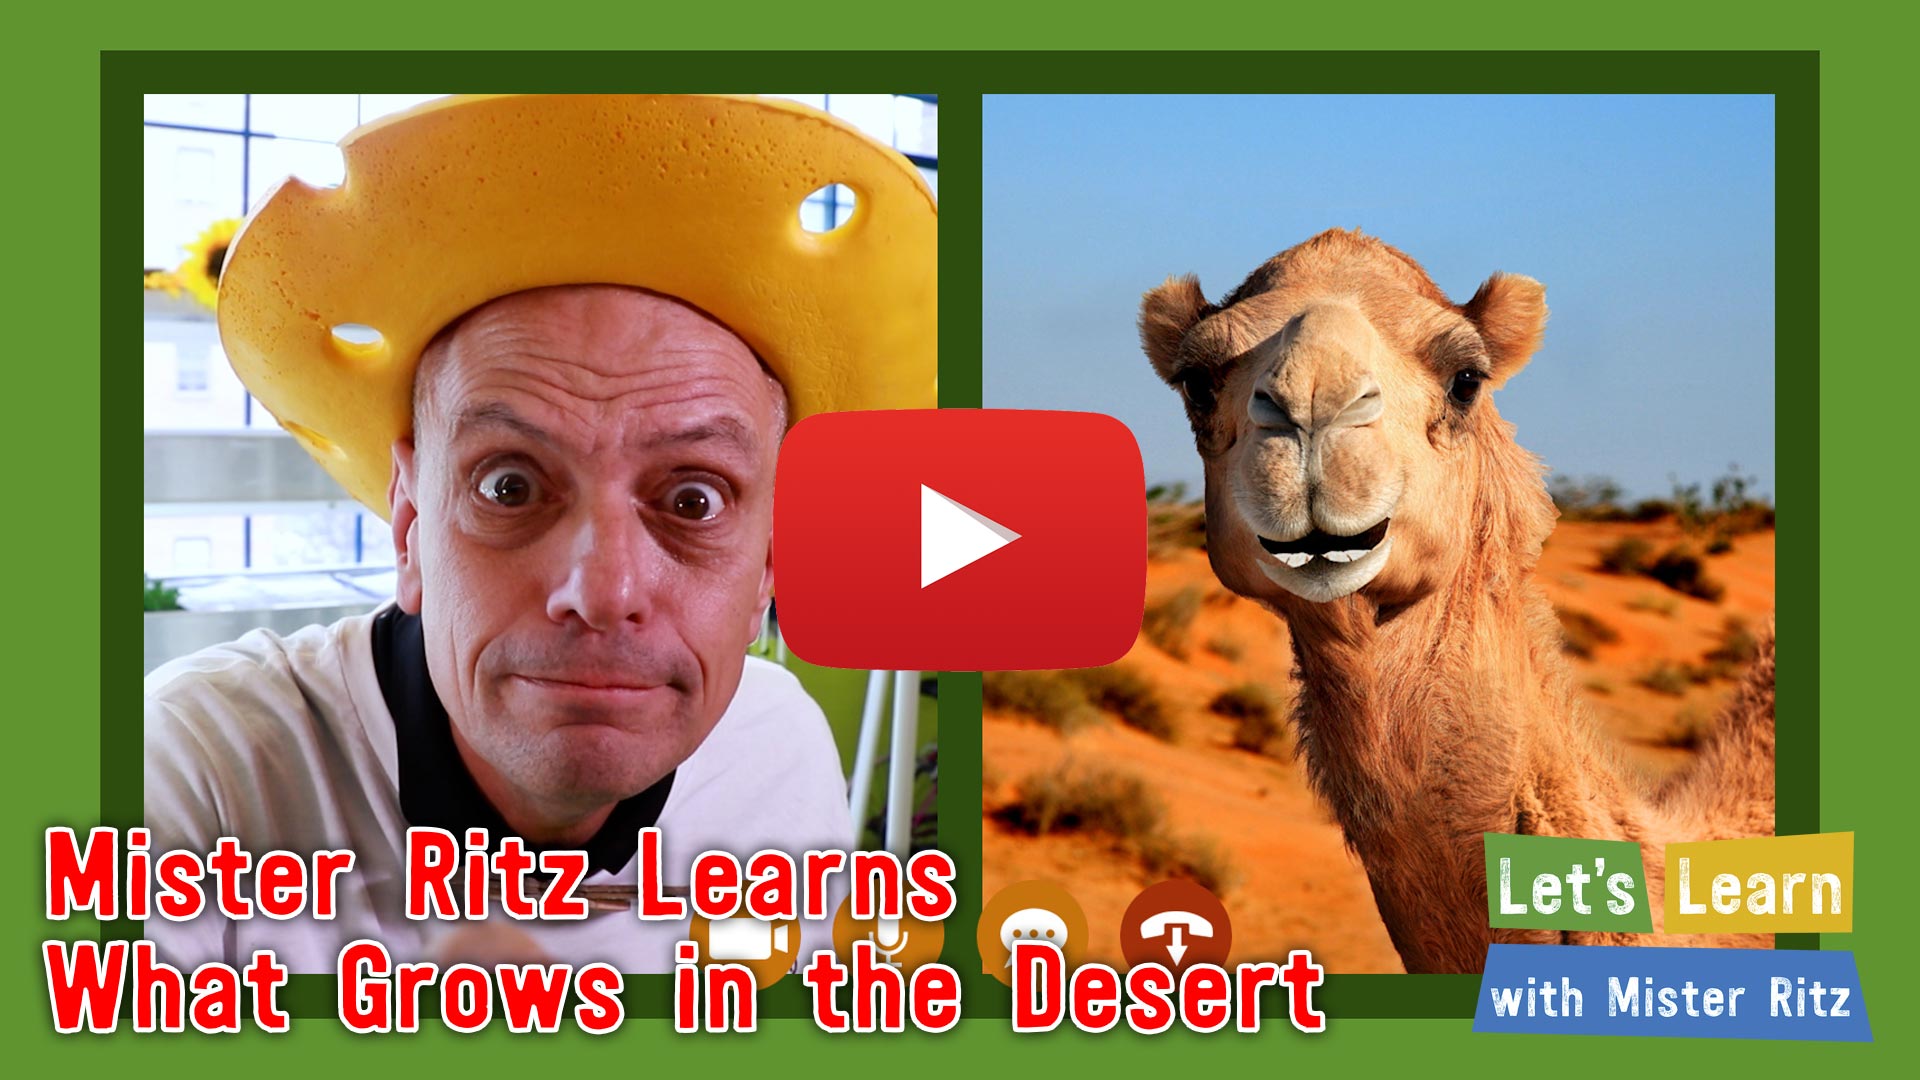 Two New Episodes Live From UAE – The Green Shiekh and Growing Food in the Desert